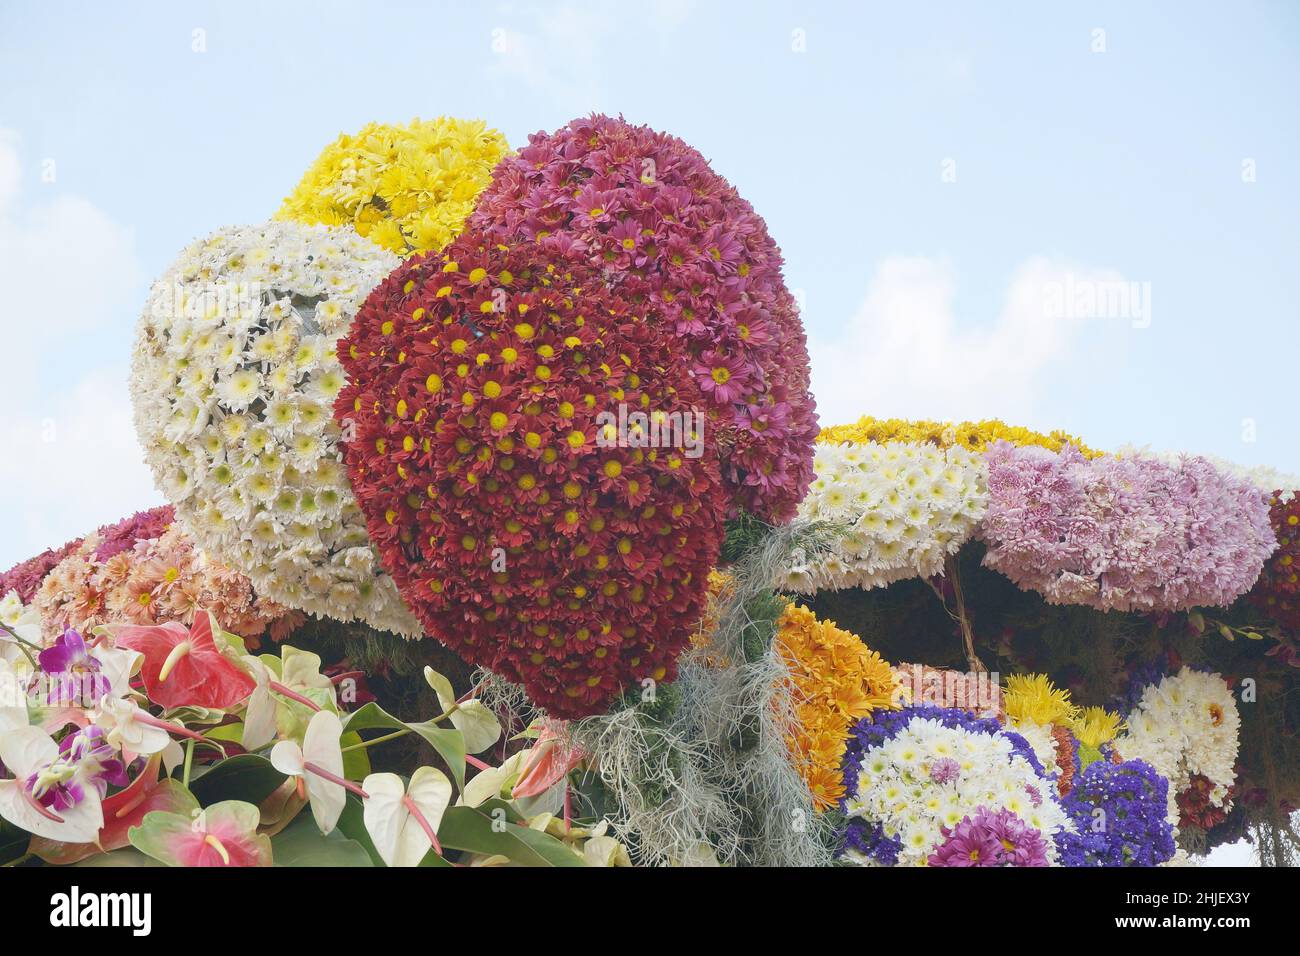 Yellow and white Chrysanthemum and pink and red Daisy flowers arranged to resemble balloons displayed in Baguio, Philippines on March 1, 2015. Stock Photo